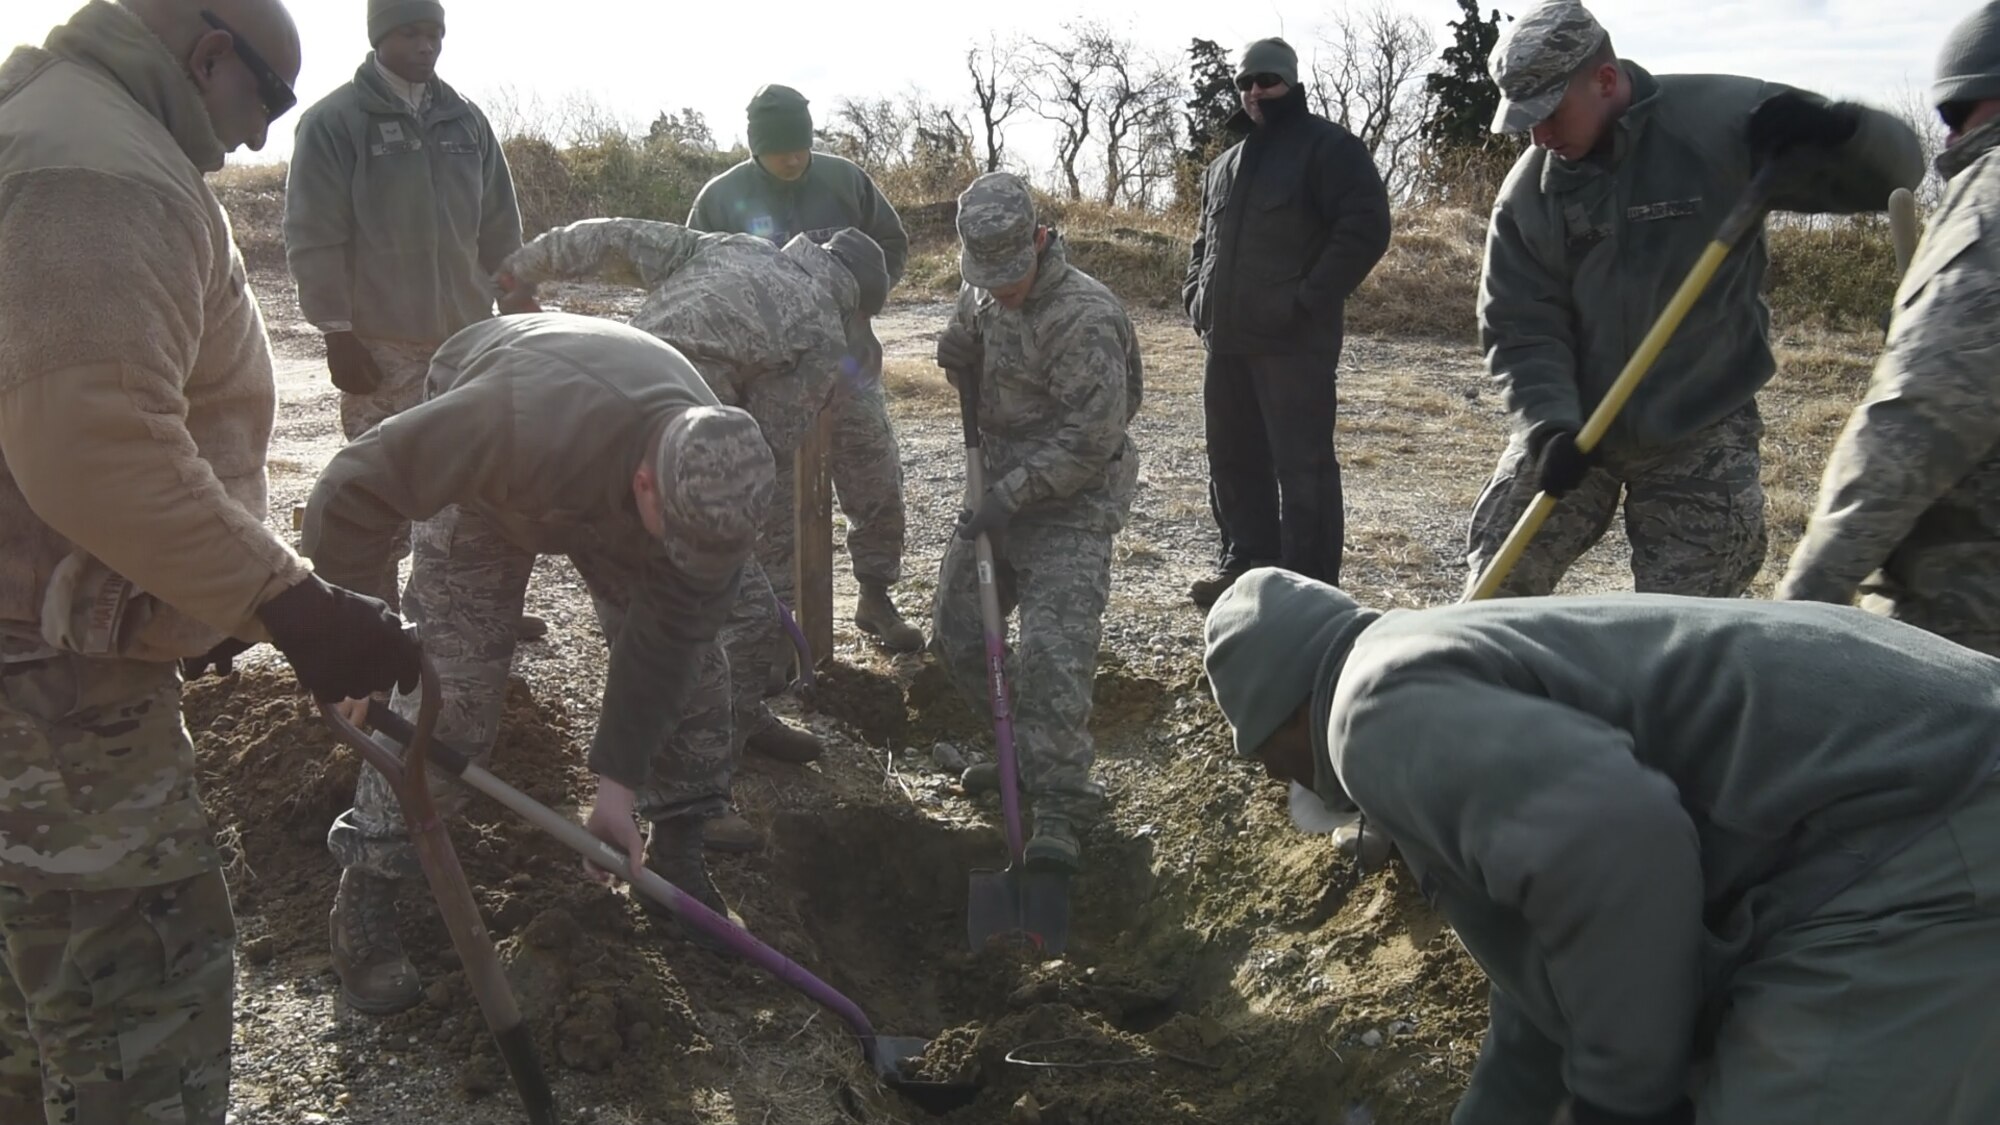 Airmen assigned to the 436th Civil Engineer Squadron build defensive fighting positions in a simulated deployed location during Prime Base Engineer Emergency Force (Prime BEEF) Day Nov. 28, 2018, at Dover Air Force Base, Del. Prime BEEF Day is a squadron-wide training day focused on maintaining and refreshing all civil engineering airmen on readiness requirements and operational capabilities. (U.S. Video by Airman First Class Dedan D. Dials)